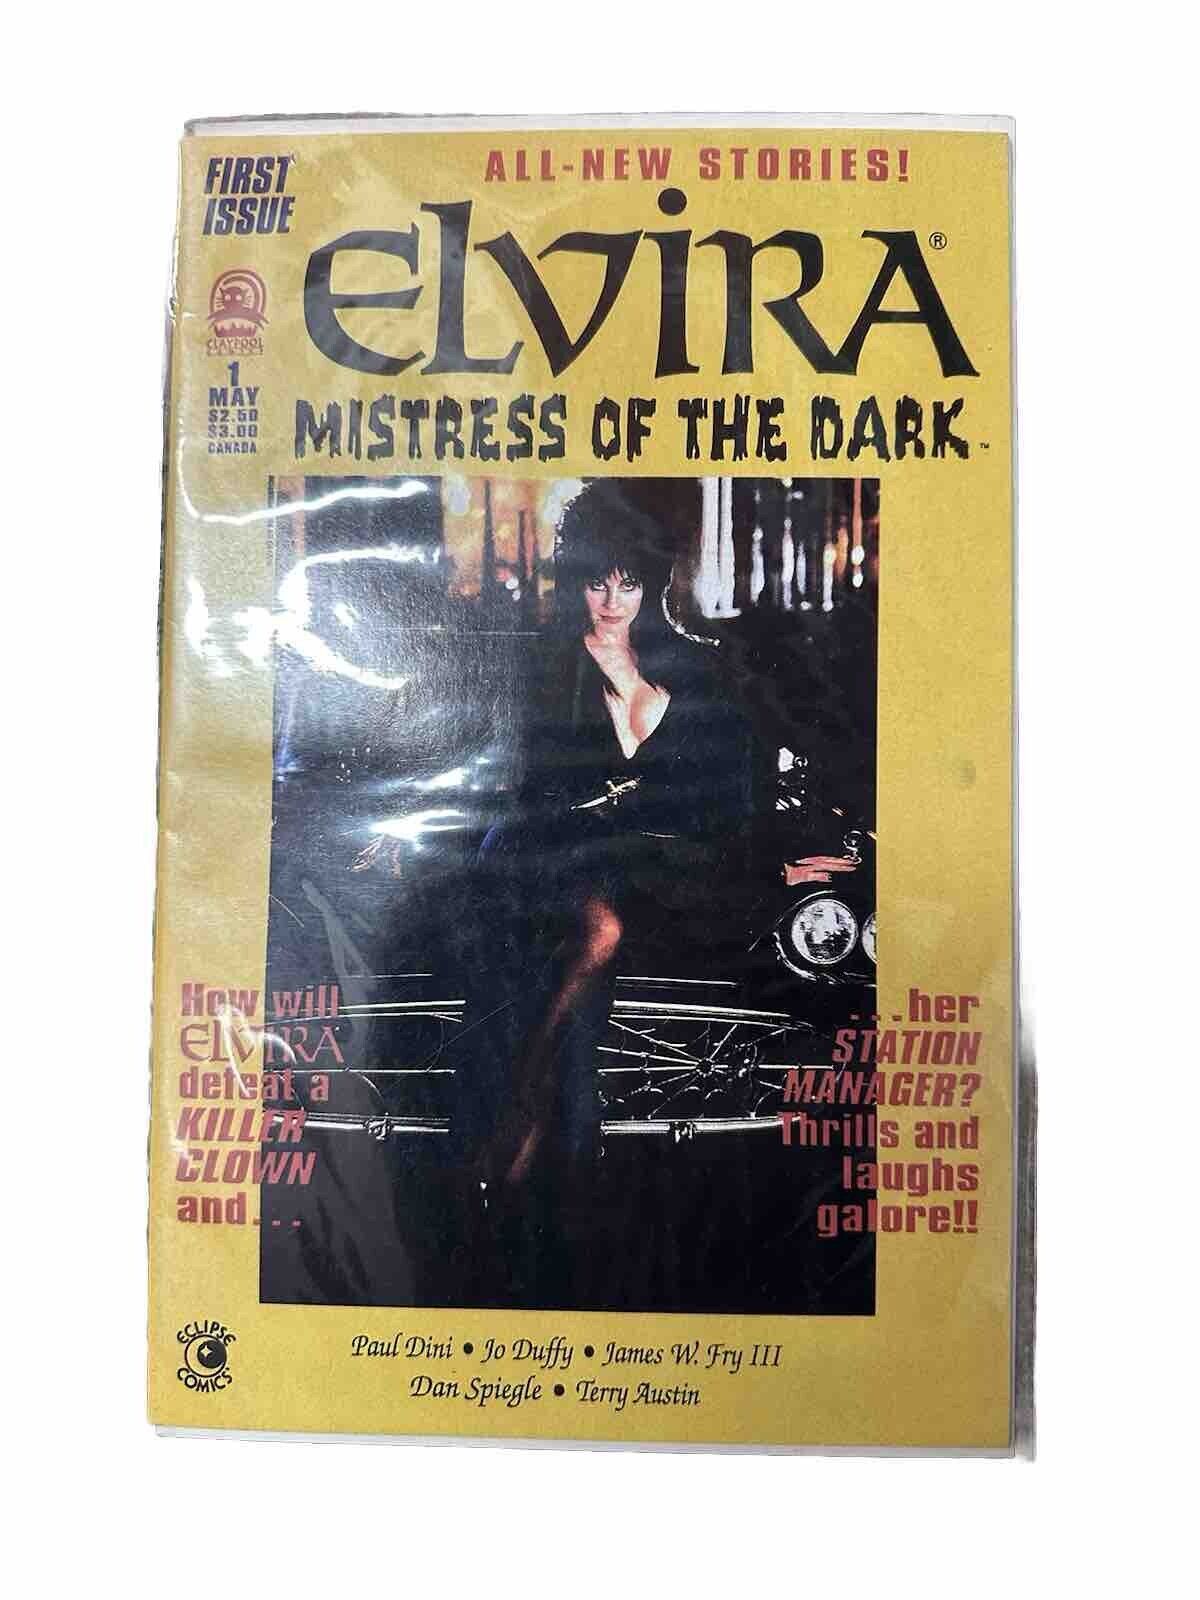 ECLIPSE ELVIRA THE MISTRESS OF THE DARK FIRST ISSUE #1 NEW STORIES